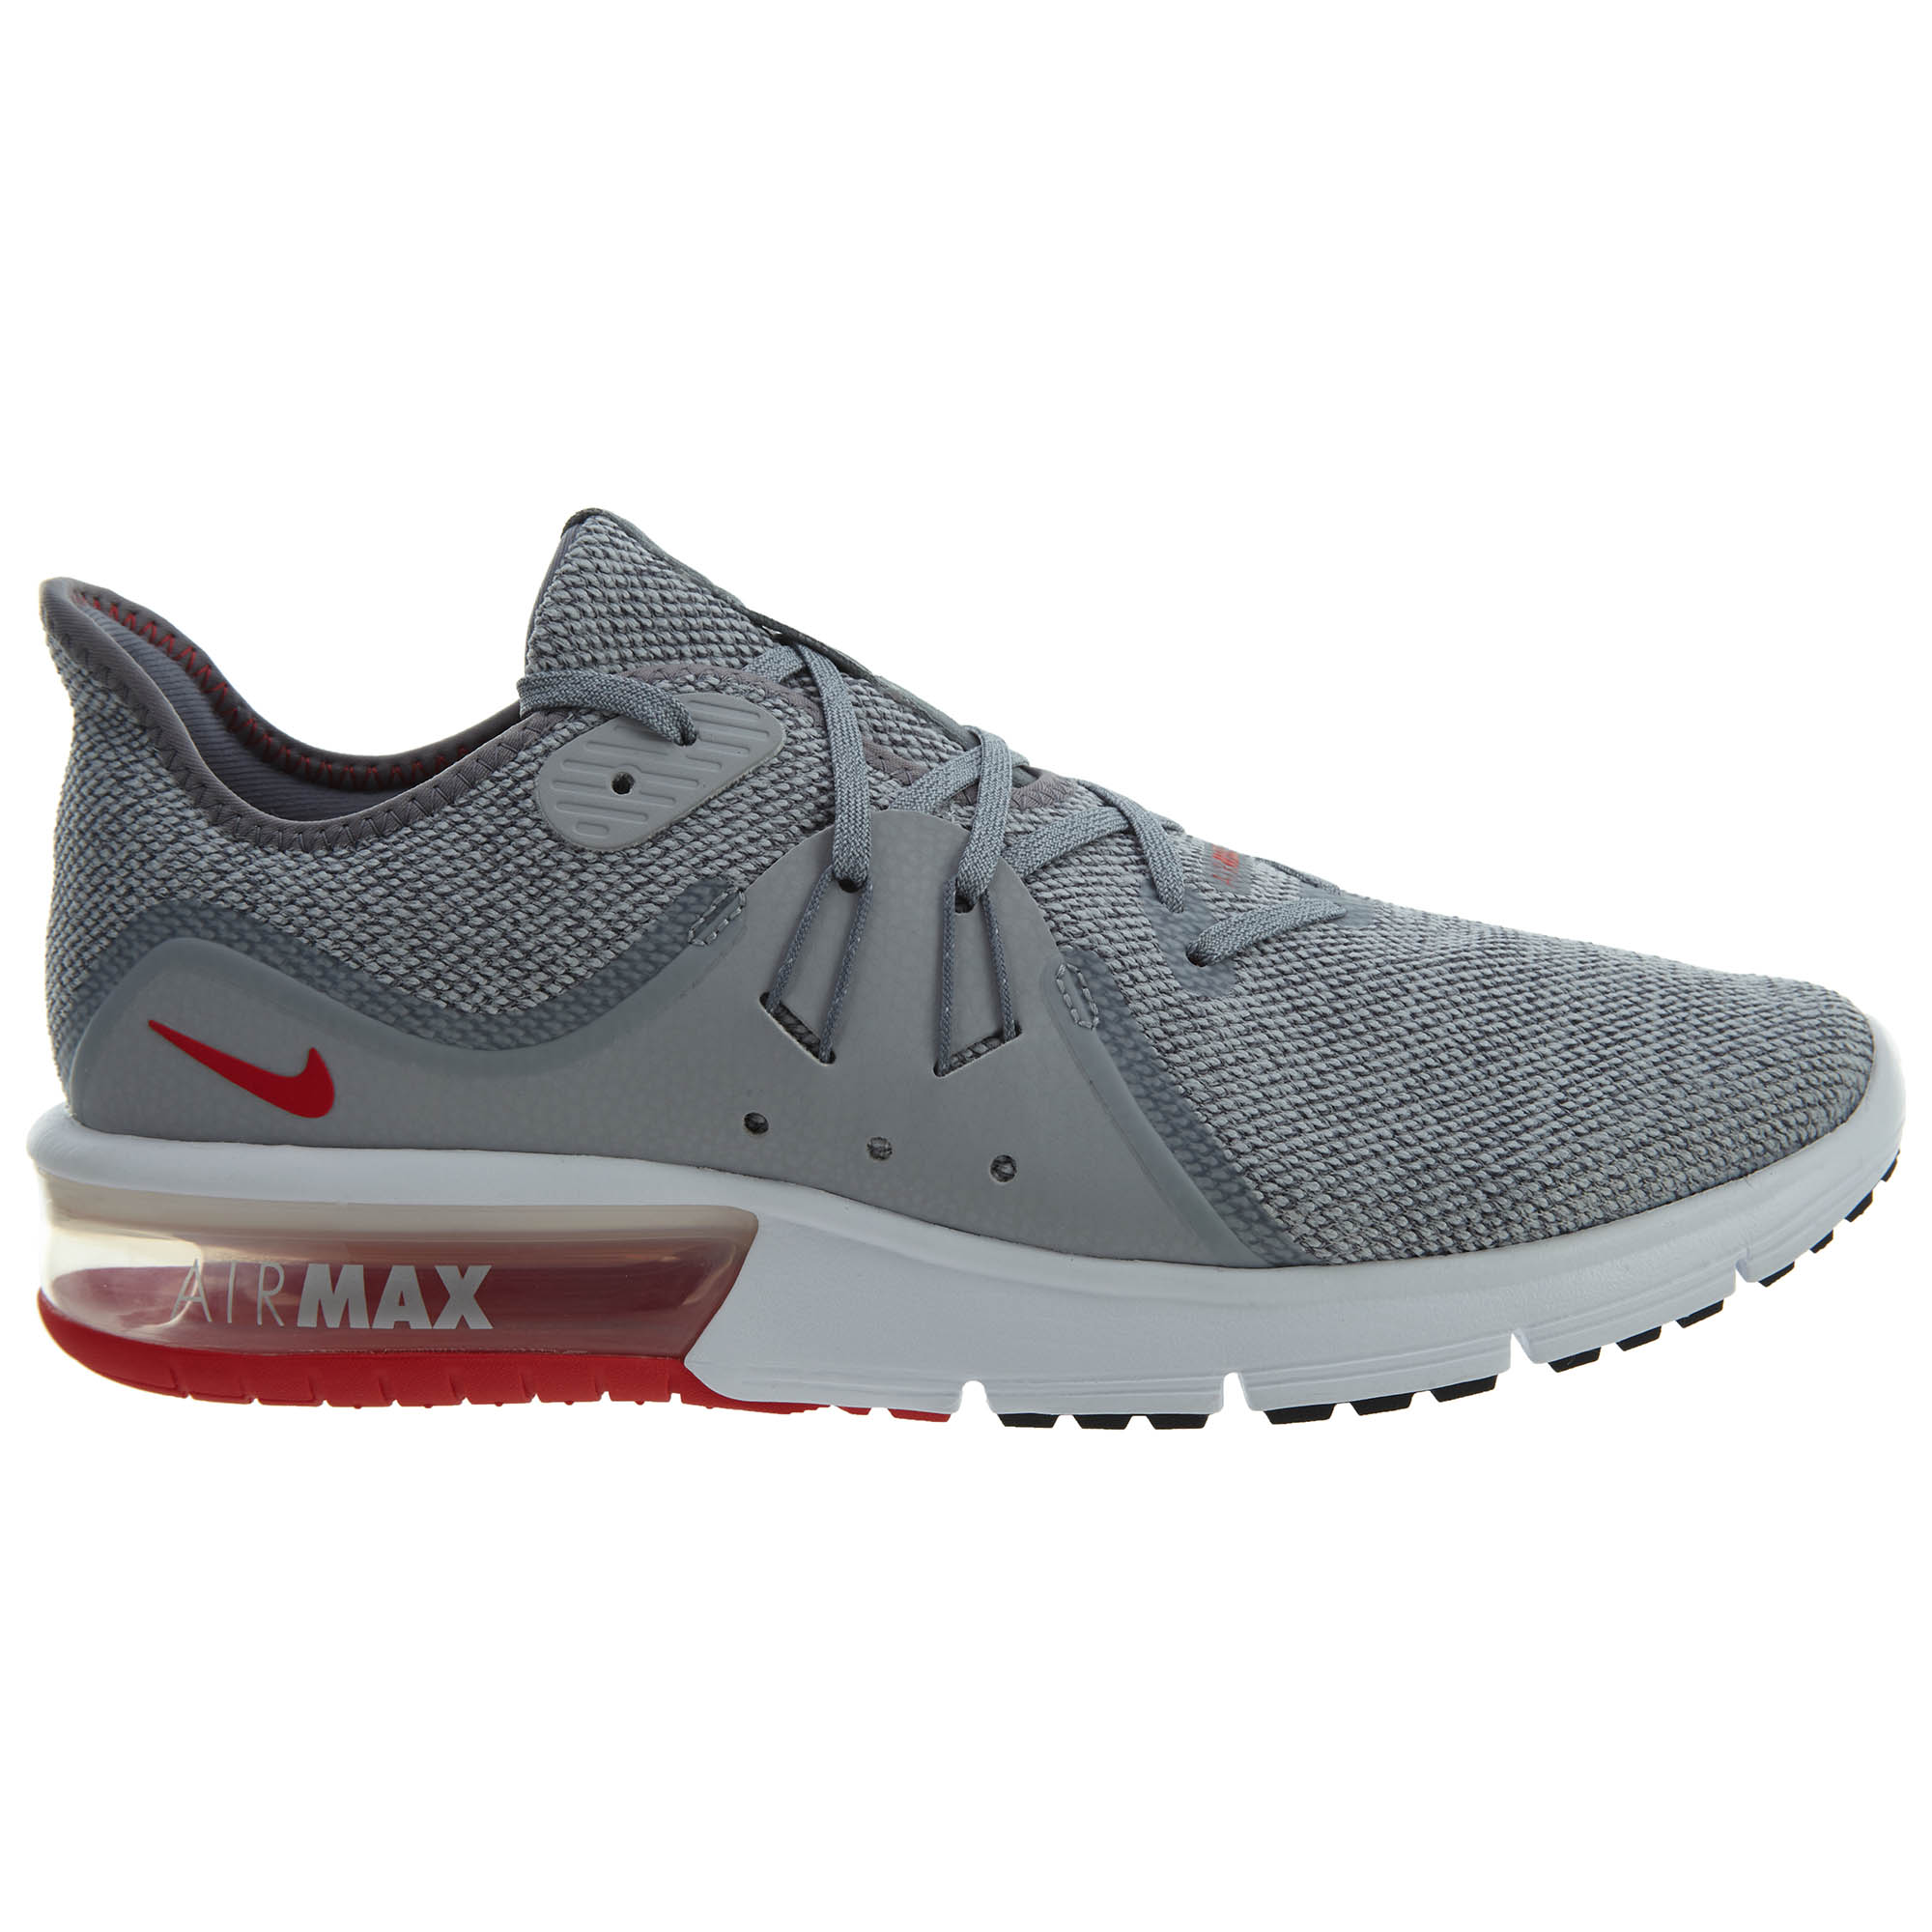 air max sequent 3 red